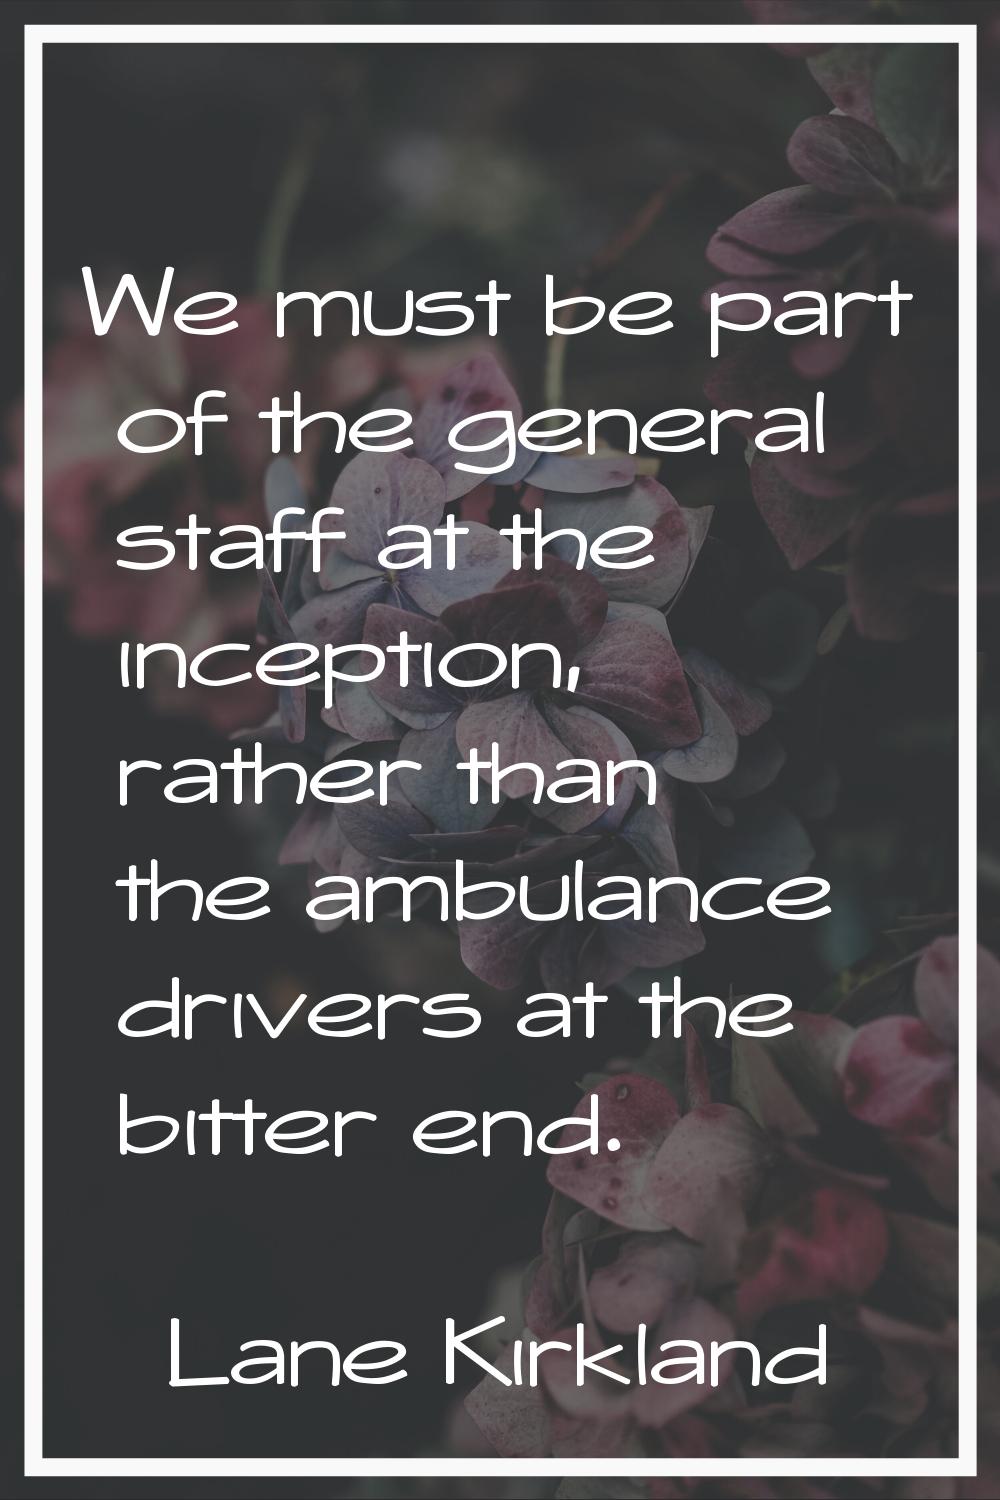 We must be part of the general staff at the inception, rather than the ambulance drivers at the bit